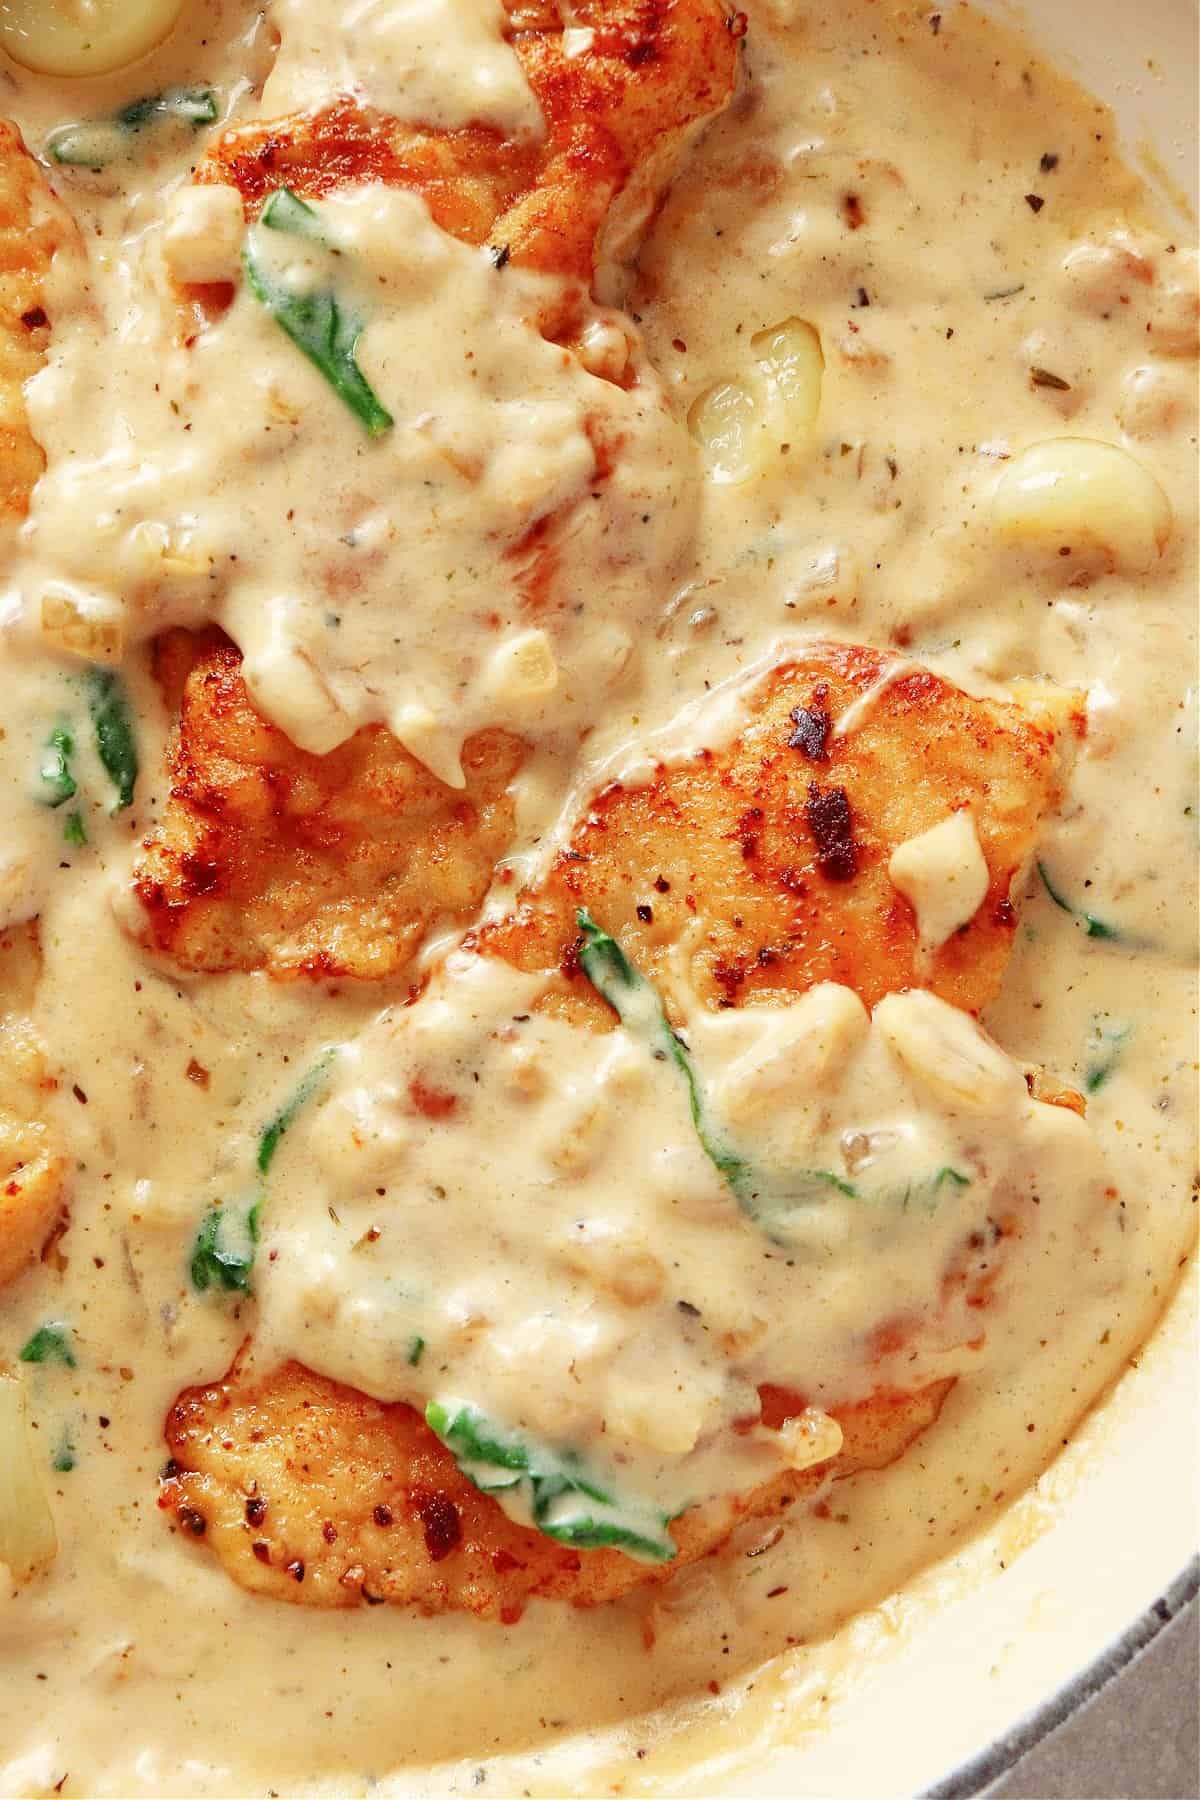 Three chicken breasts in creamy sauce with garlic and spinach.